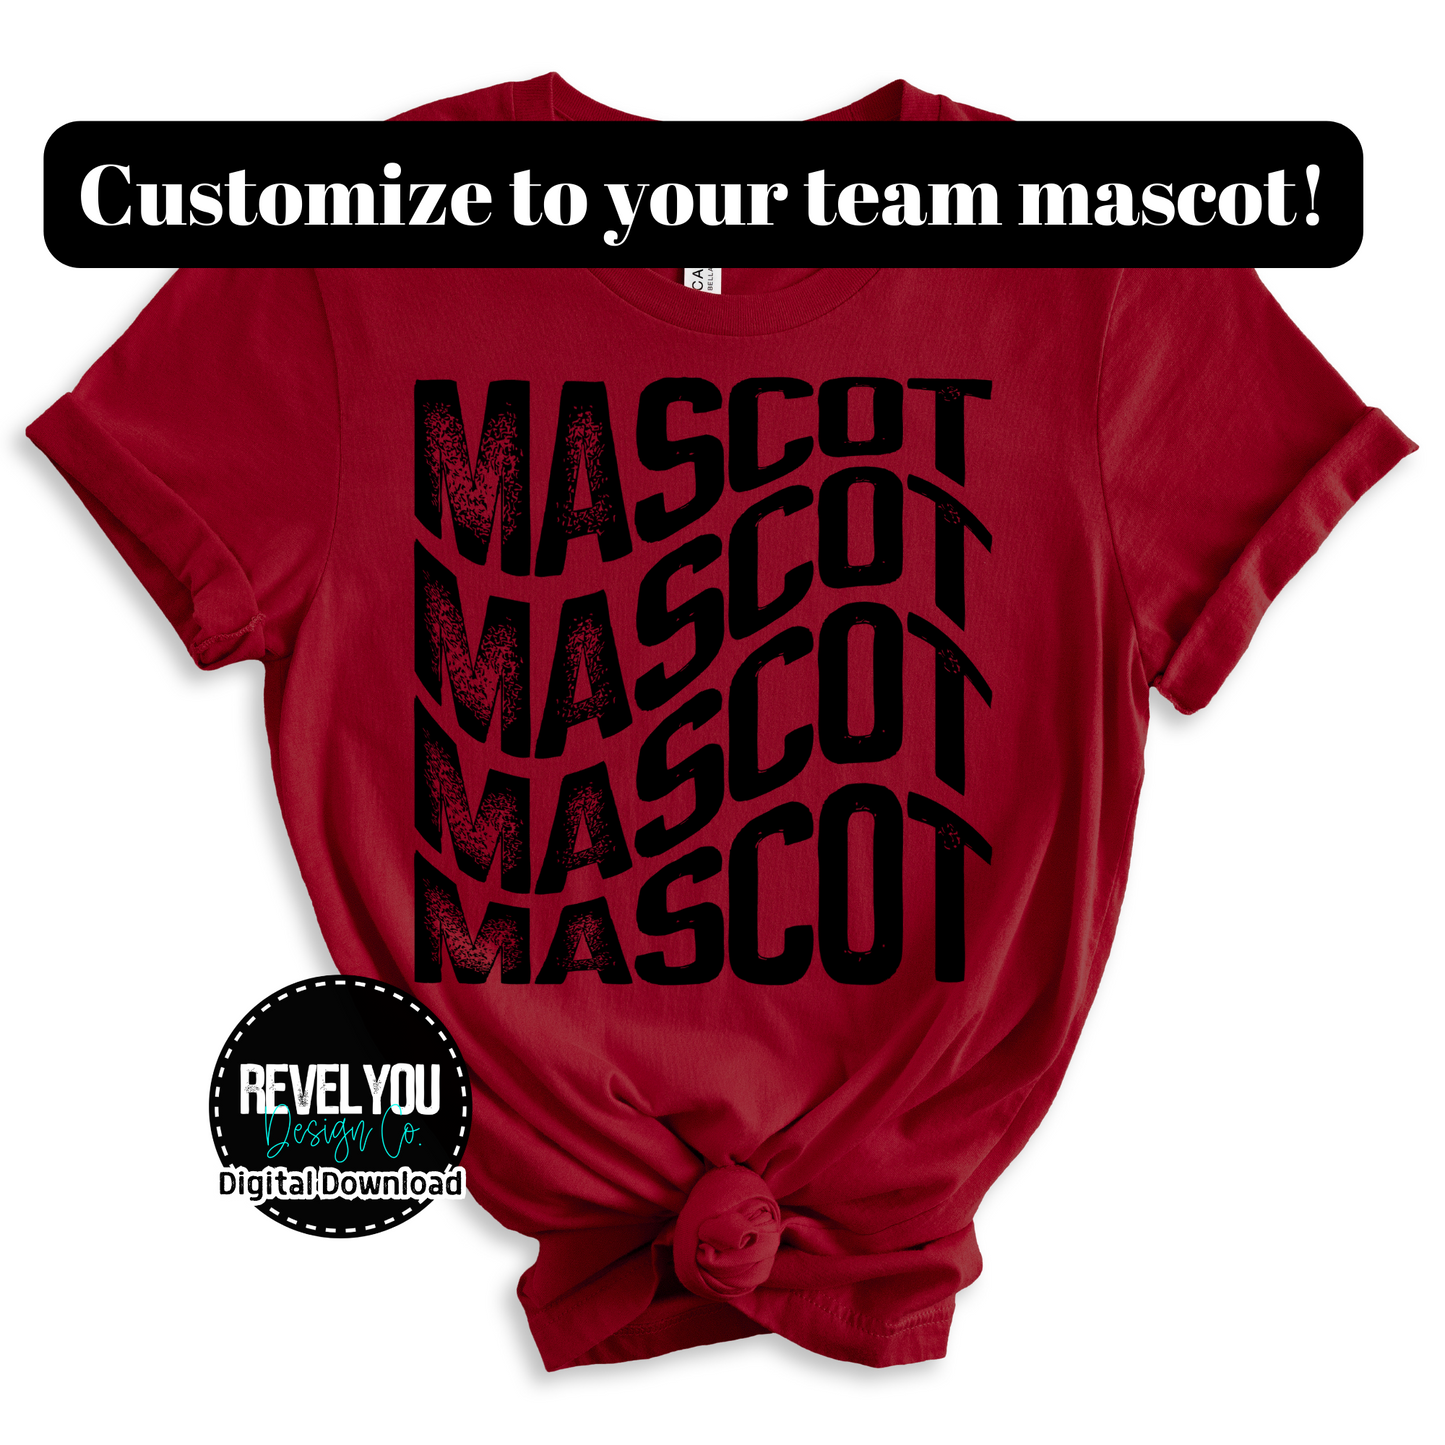 Mascot Wave *Customize to Your Team* - PNG - BLACK